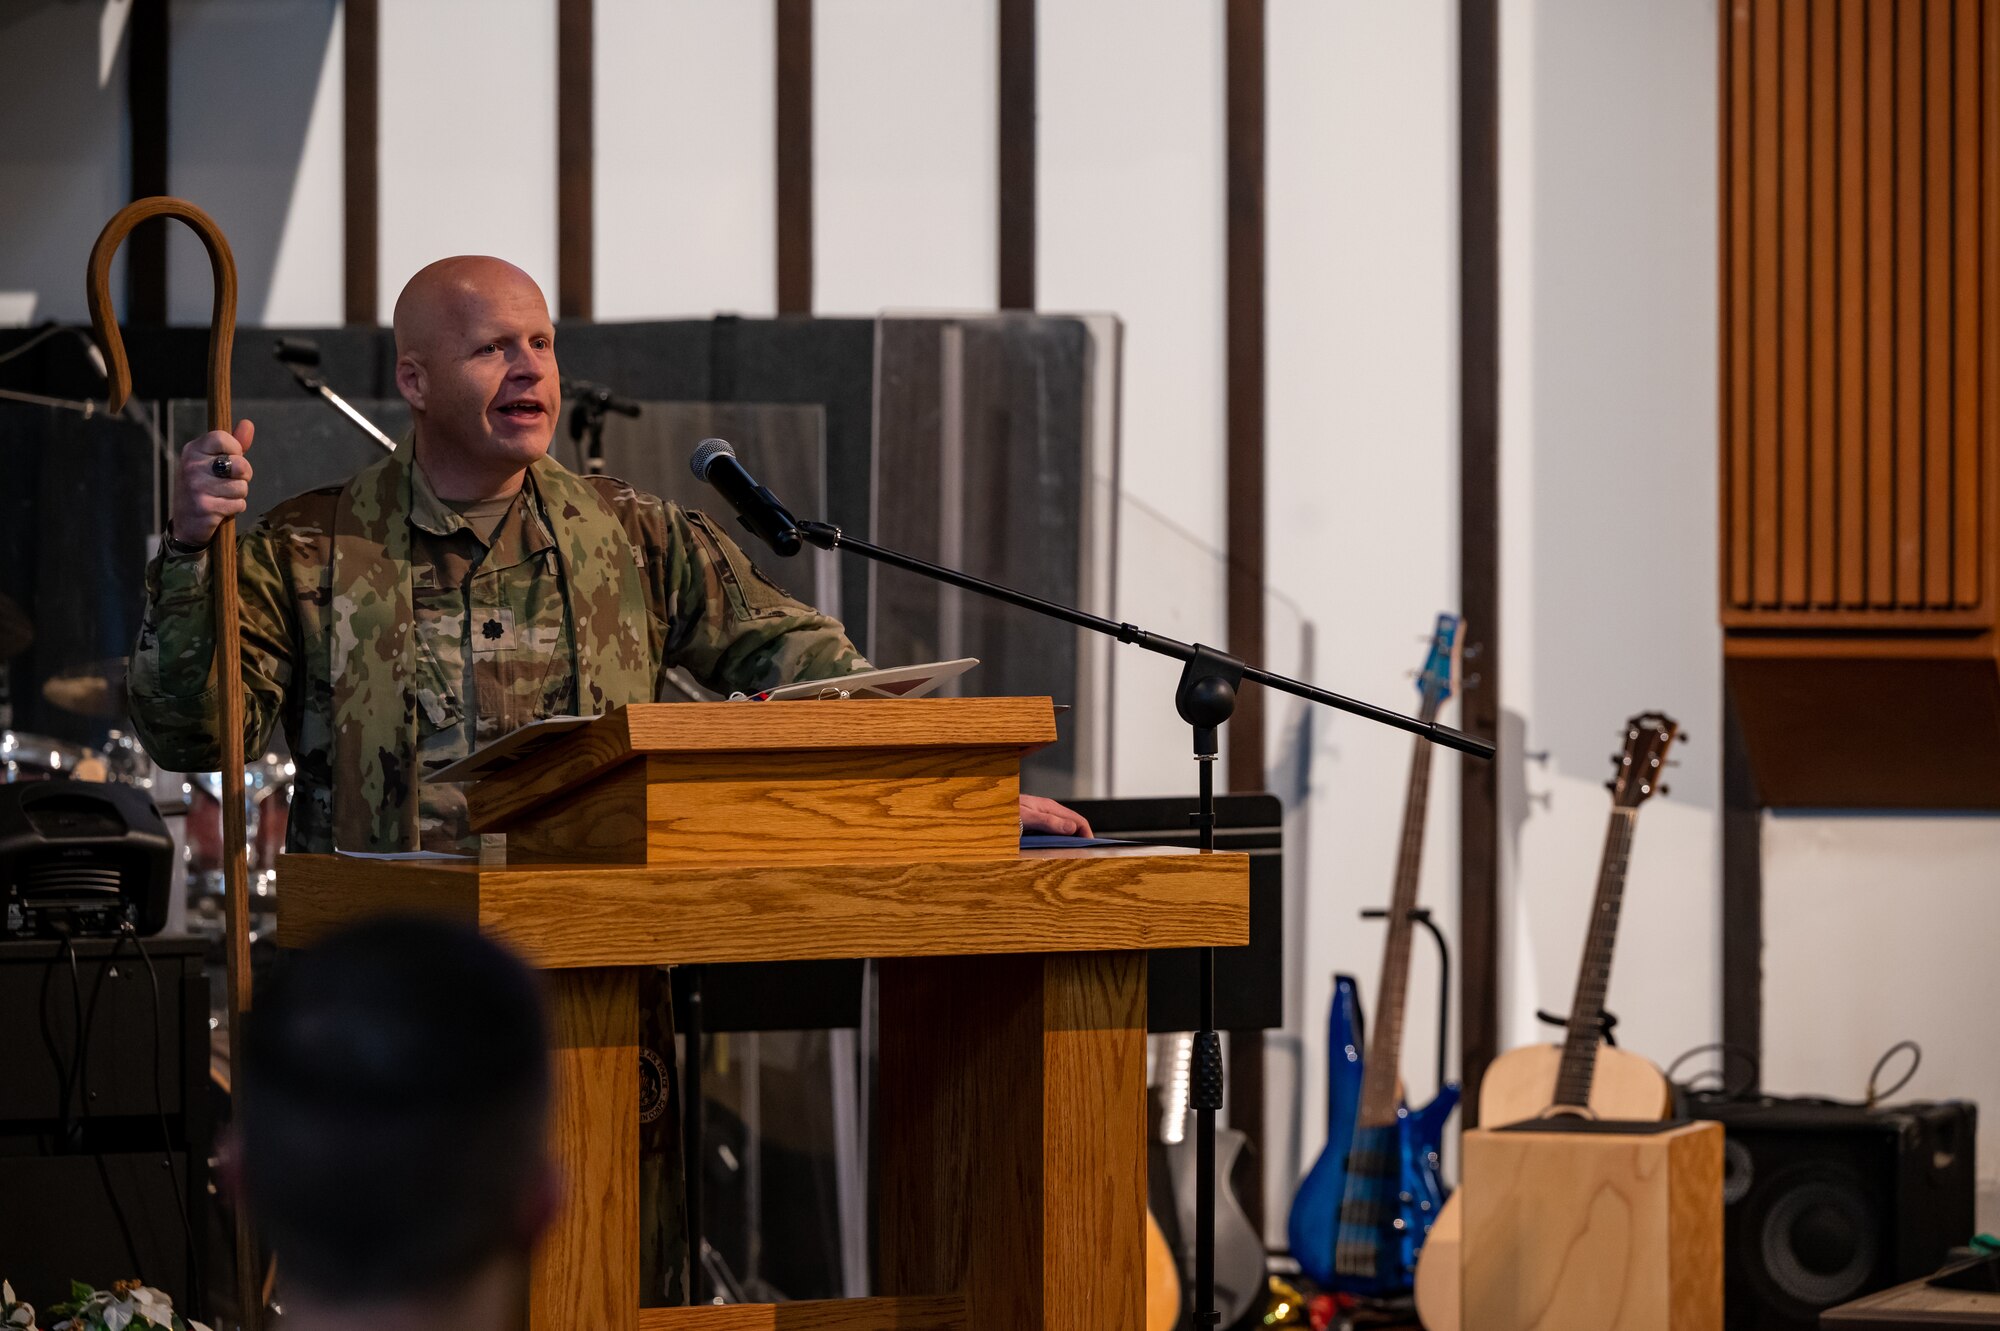 Lt. Col. Ronald Feeser, 5th Bomb Wing command chaplain, gives a speech during an Assumption of the Stole Ceremony at Minot Air Force, North Dakota, Nov. 30, 2023. Wing chaplain responsibilities include advising the commanders on matters of religion, morals and morale, ensuring troops and families have freedom to practice their religion and leading religious support operations for the base. (U.S. Air Force photo by Airman 1st Class Alexander Nottingham)